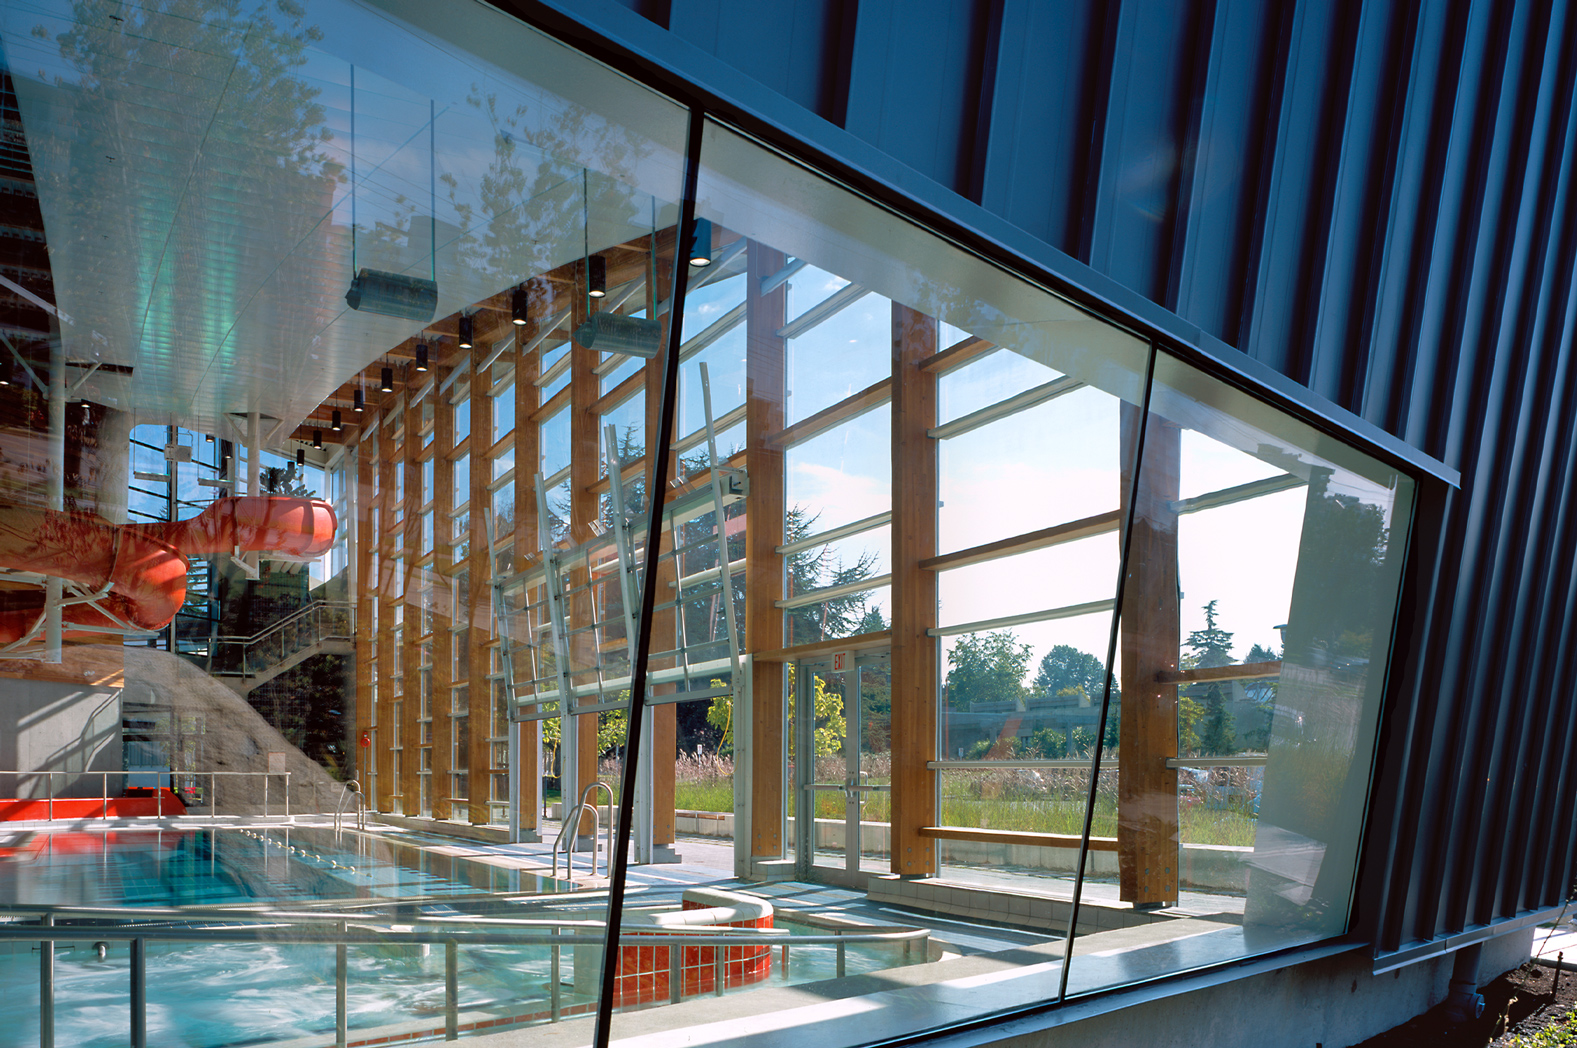 Looking through an outdoor window into the indoor pool, showcasing the large red slide and space that the windows create.